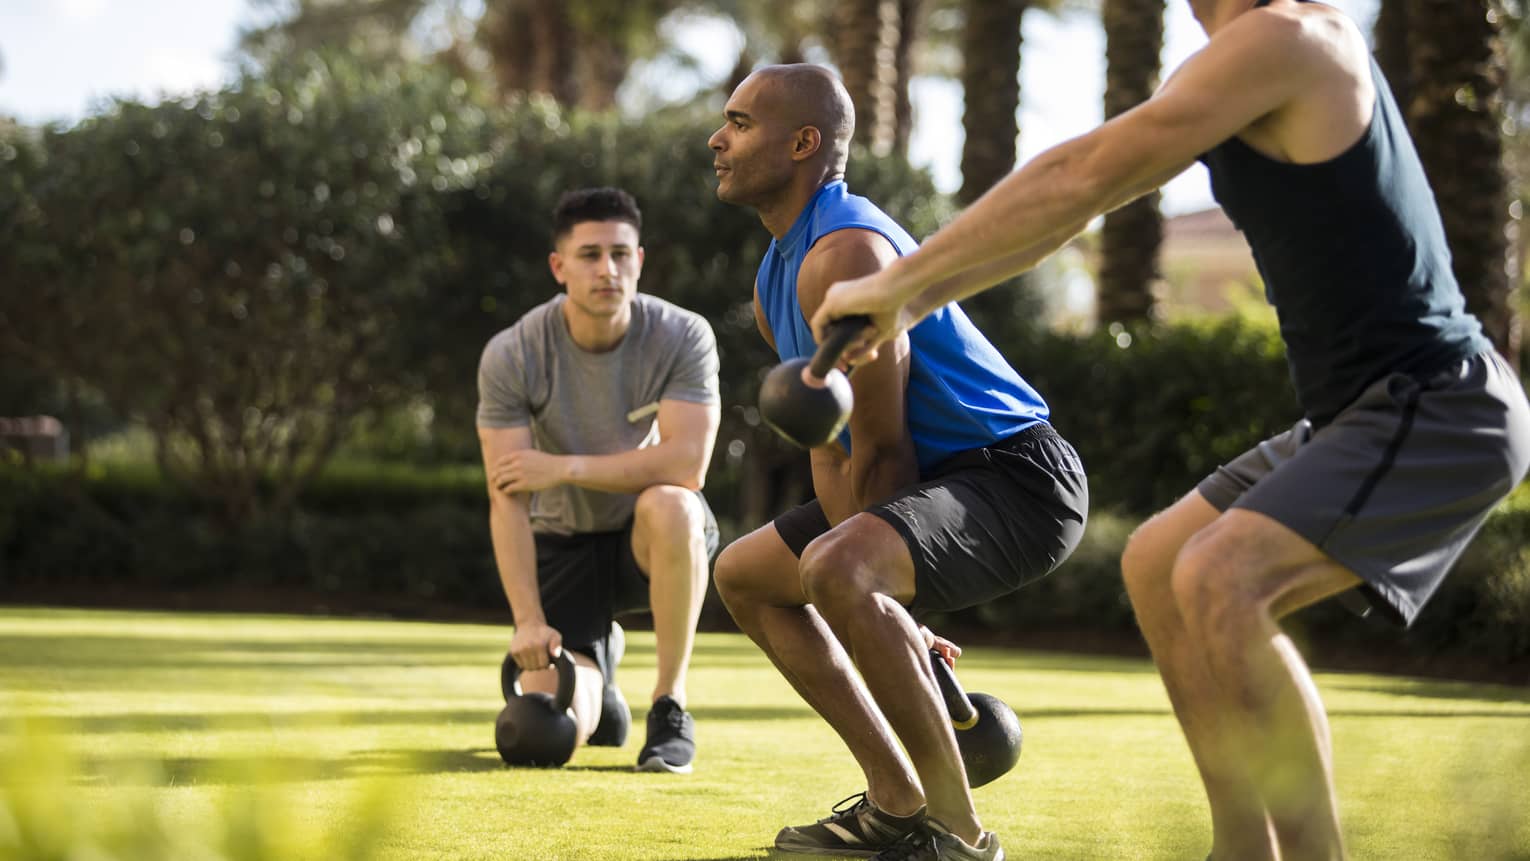 Four Seasons trainer watches as two men squat, lift kettlebell weights on lawn